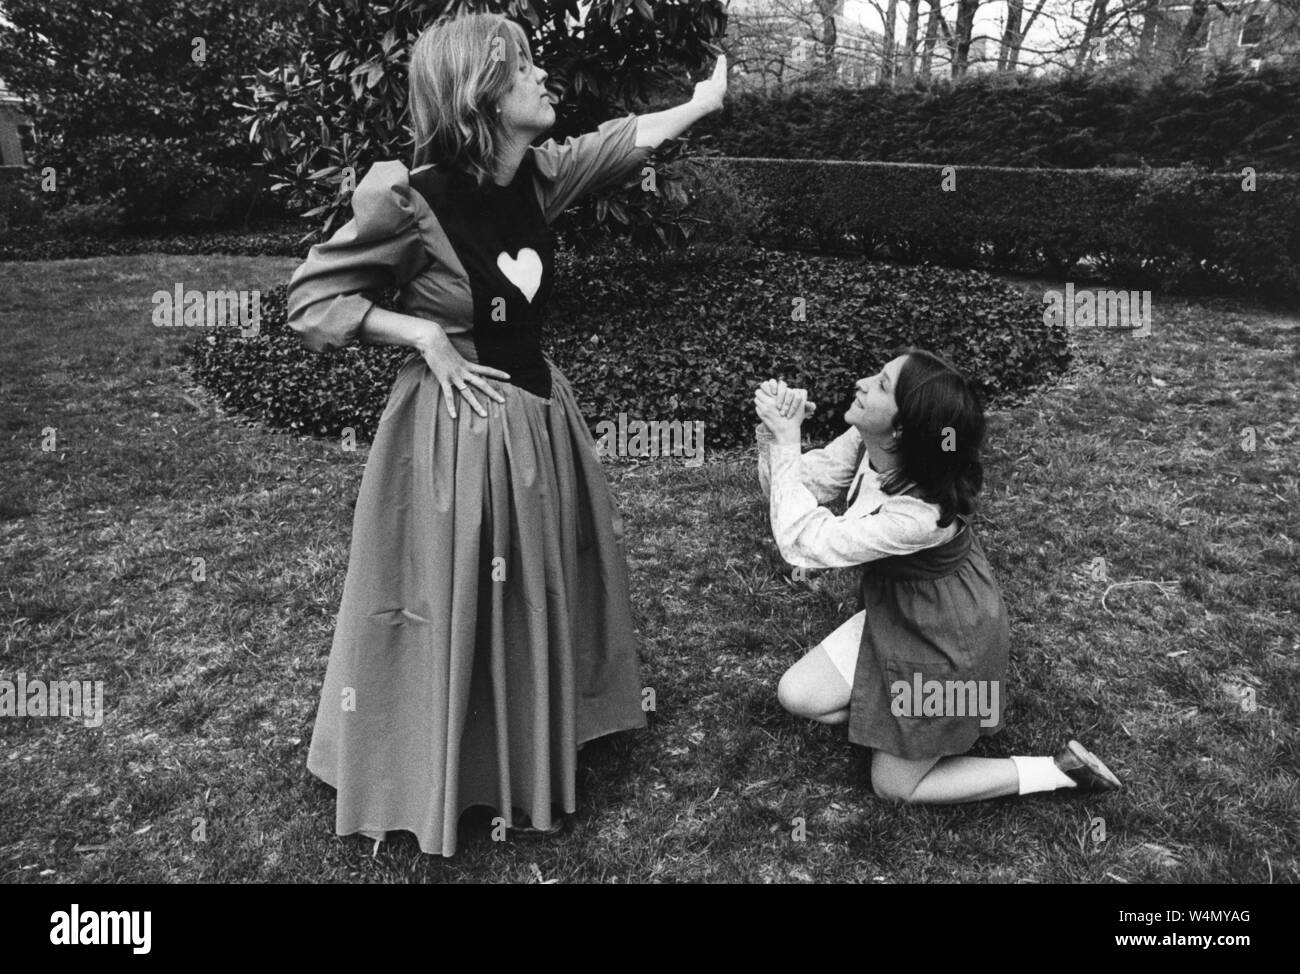 College students from Johns Hopkins University perform on the Homewood campus in Baltimore, Maryland during the University's annual spring fair, which included outdoor concerts, plays, rides, vendors, and more, April, 1975. From the Historical Photographs Collection. () Stock Photo